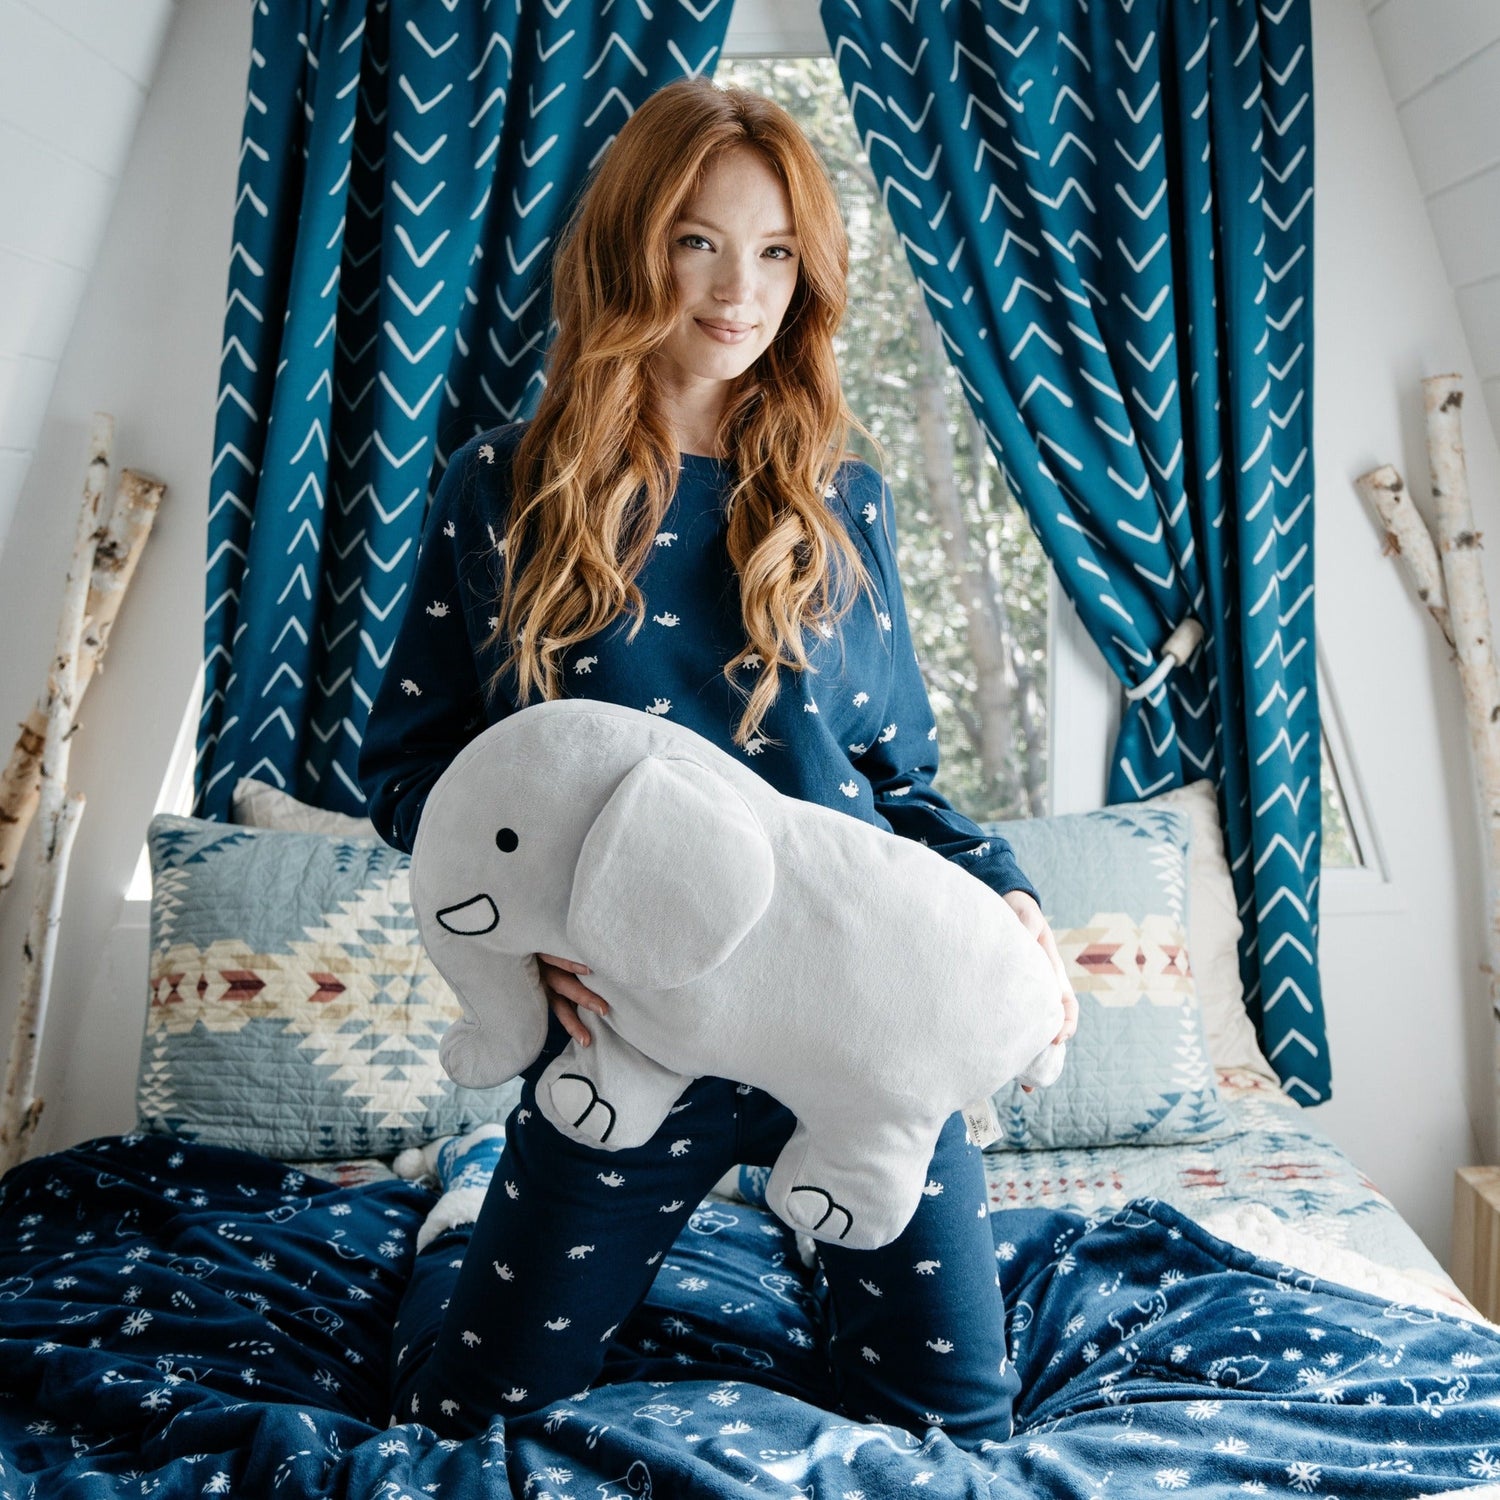 Shop Ivory Ella Elephant Shaped Pillow - Premium Travel Pillow from Ivory Ella Online now at Spoiled Brat 